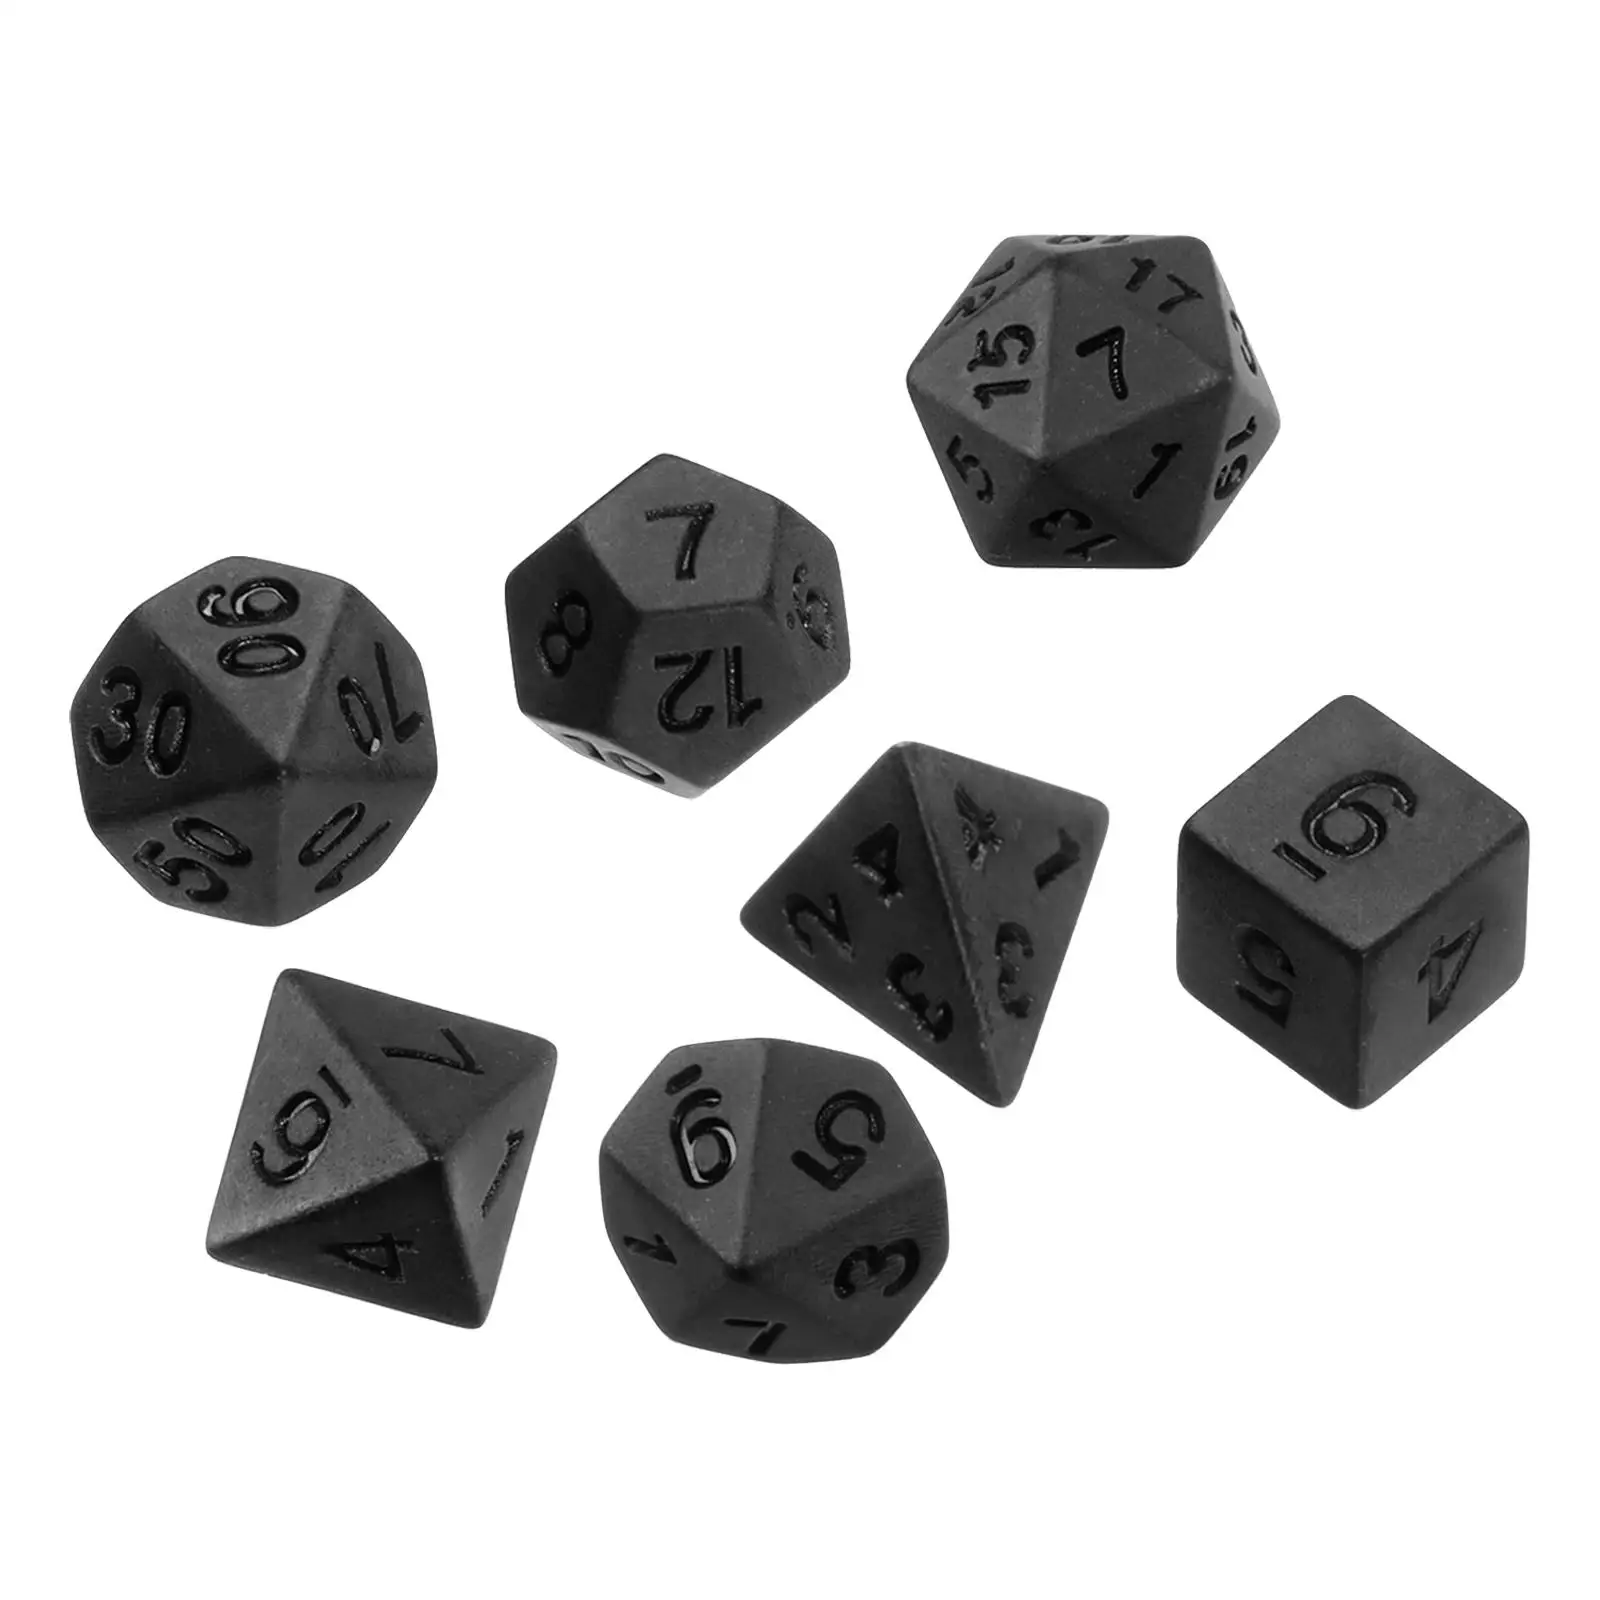 7x Polyhedral Dices Set D4 D6 D8 D10 D12 D20 Multi Side Dice Board Game Accessories for RPG Role Playing Table Games Party Favor